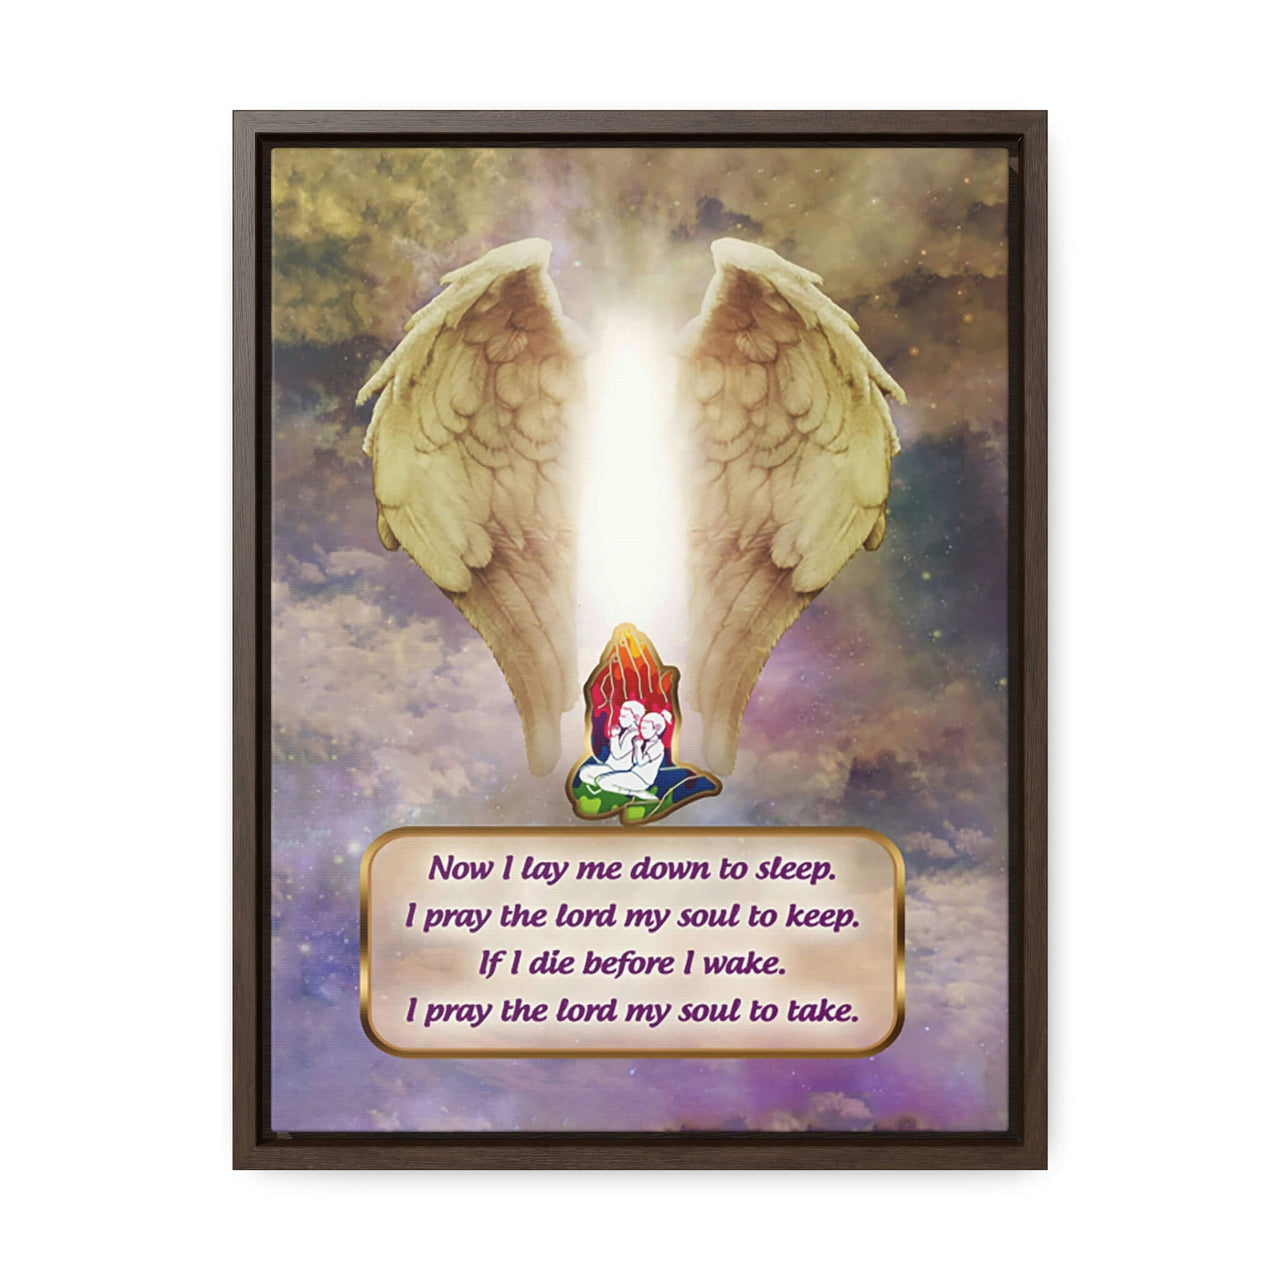 Children's Prayer Canvas: A Mindful and Thoughtful Gift for Any Occasion